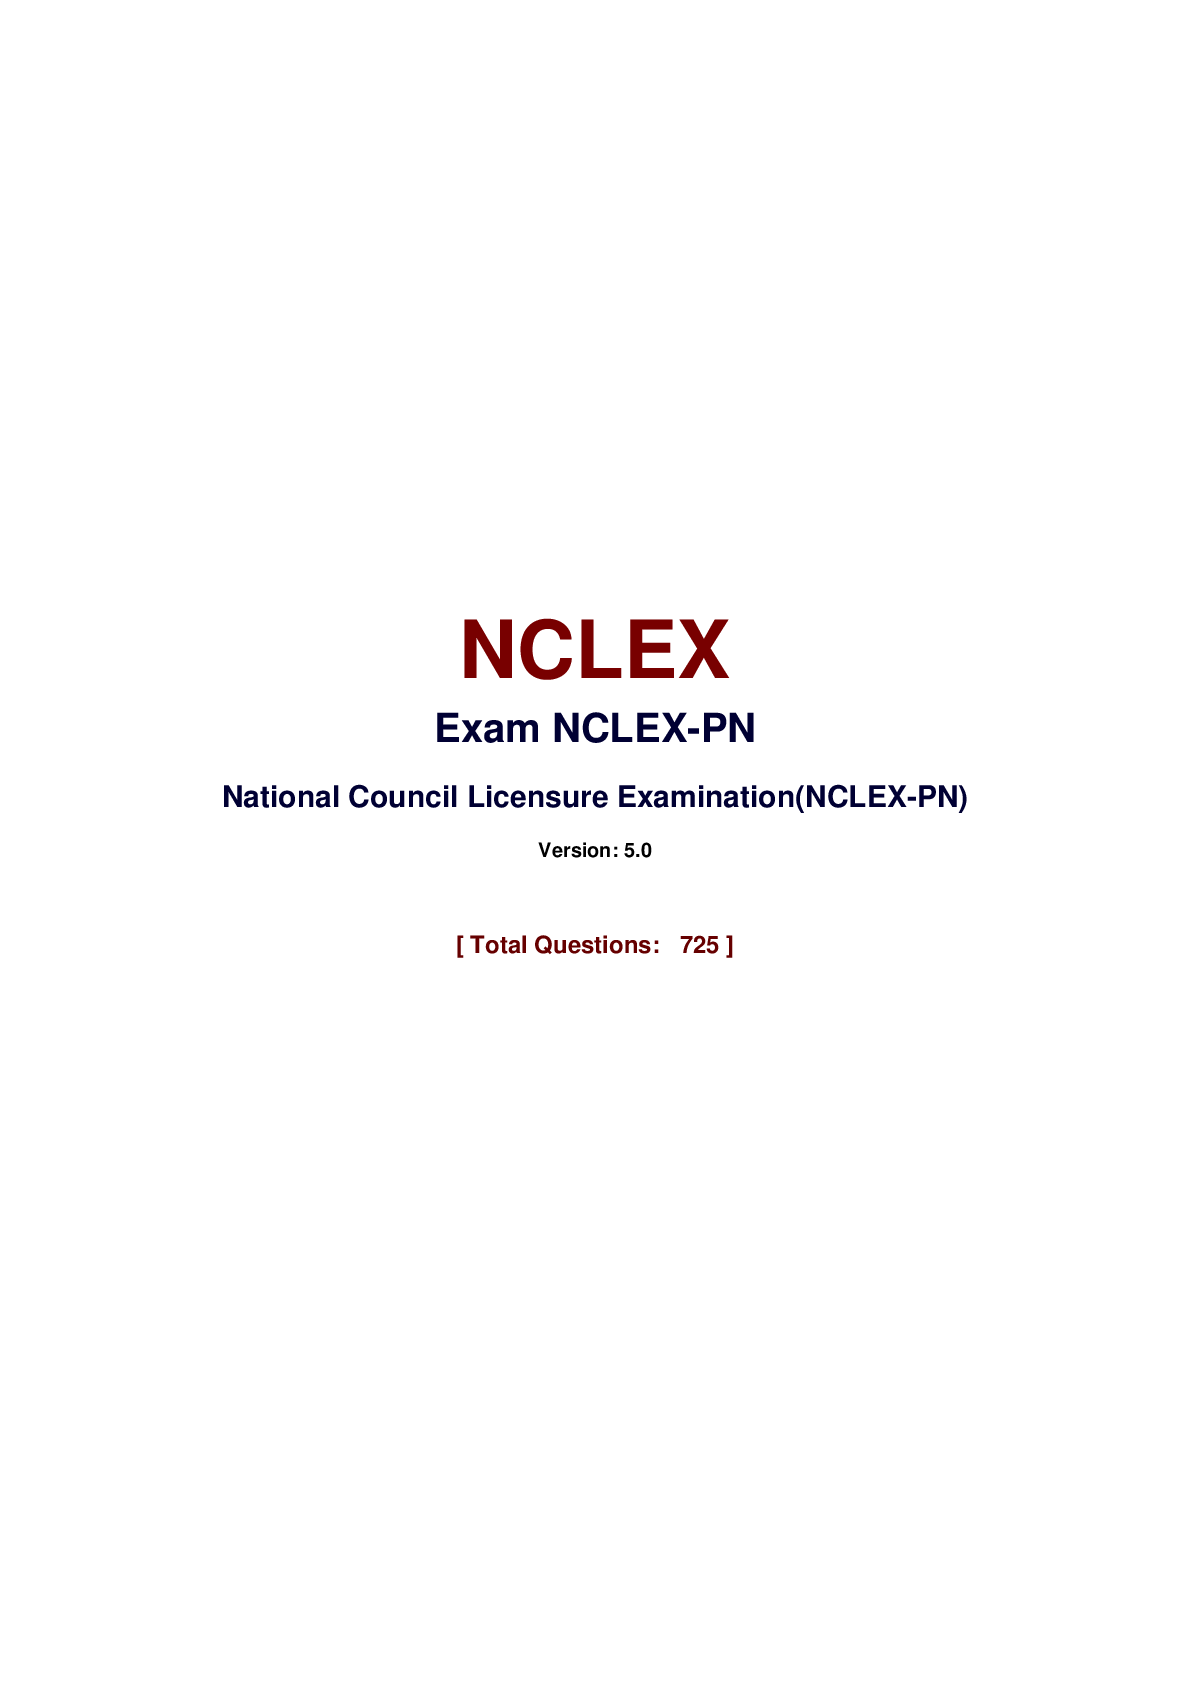 NCLEX-PN EXAM GUIDE WITH ANSWERS